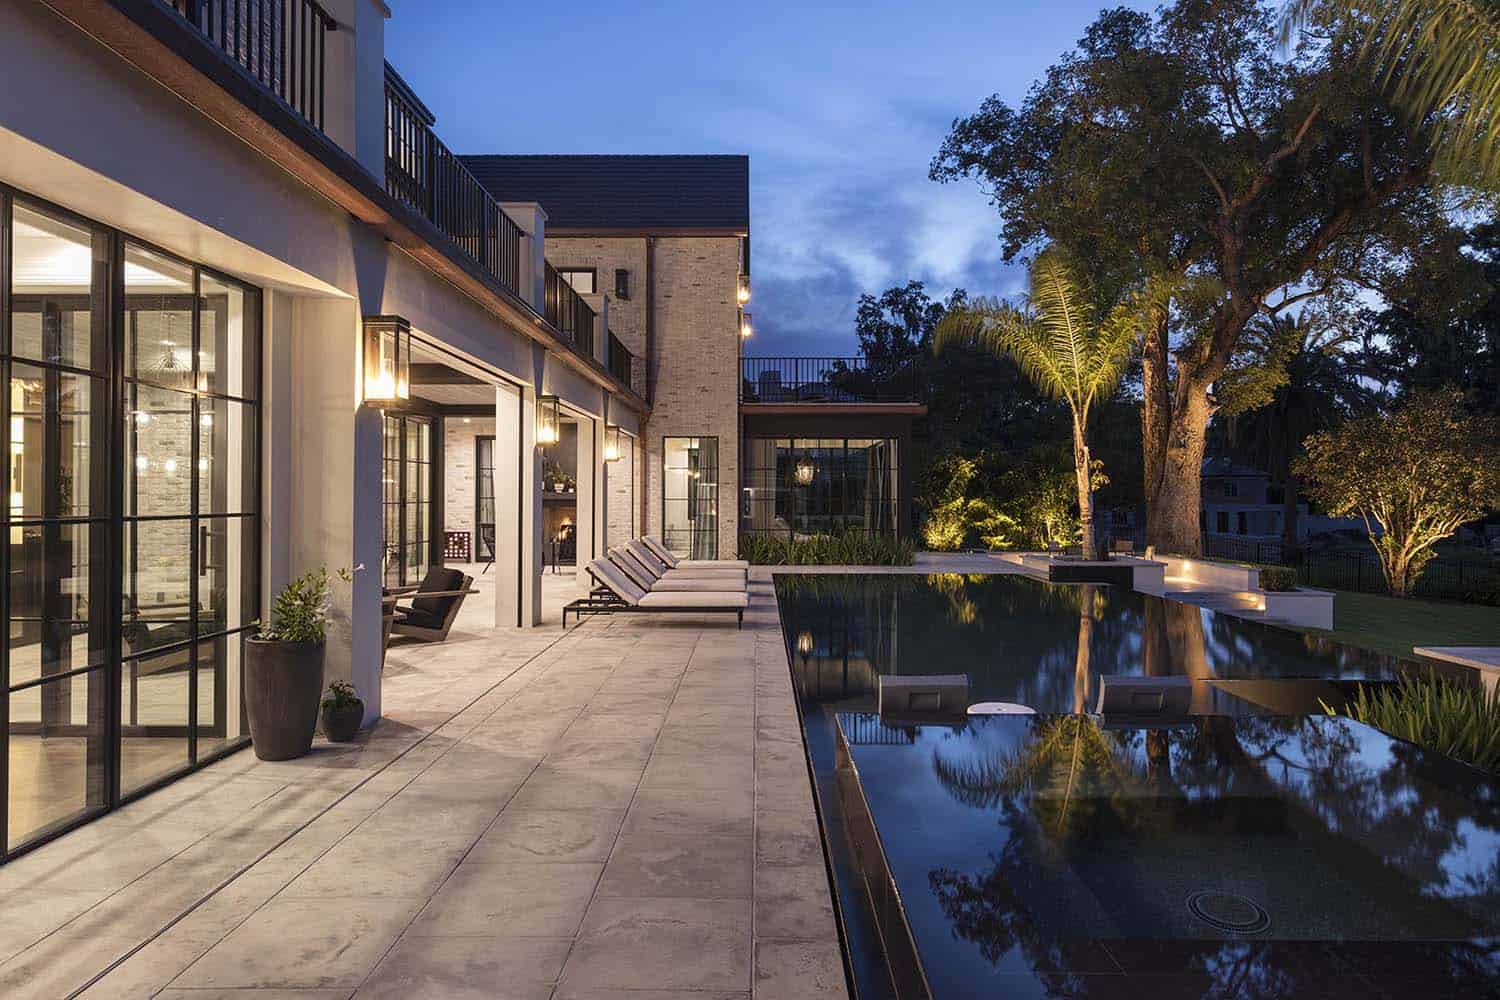 transitional style home backyard patio exterior at dusk